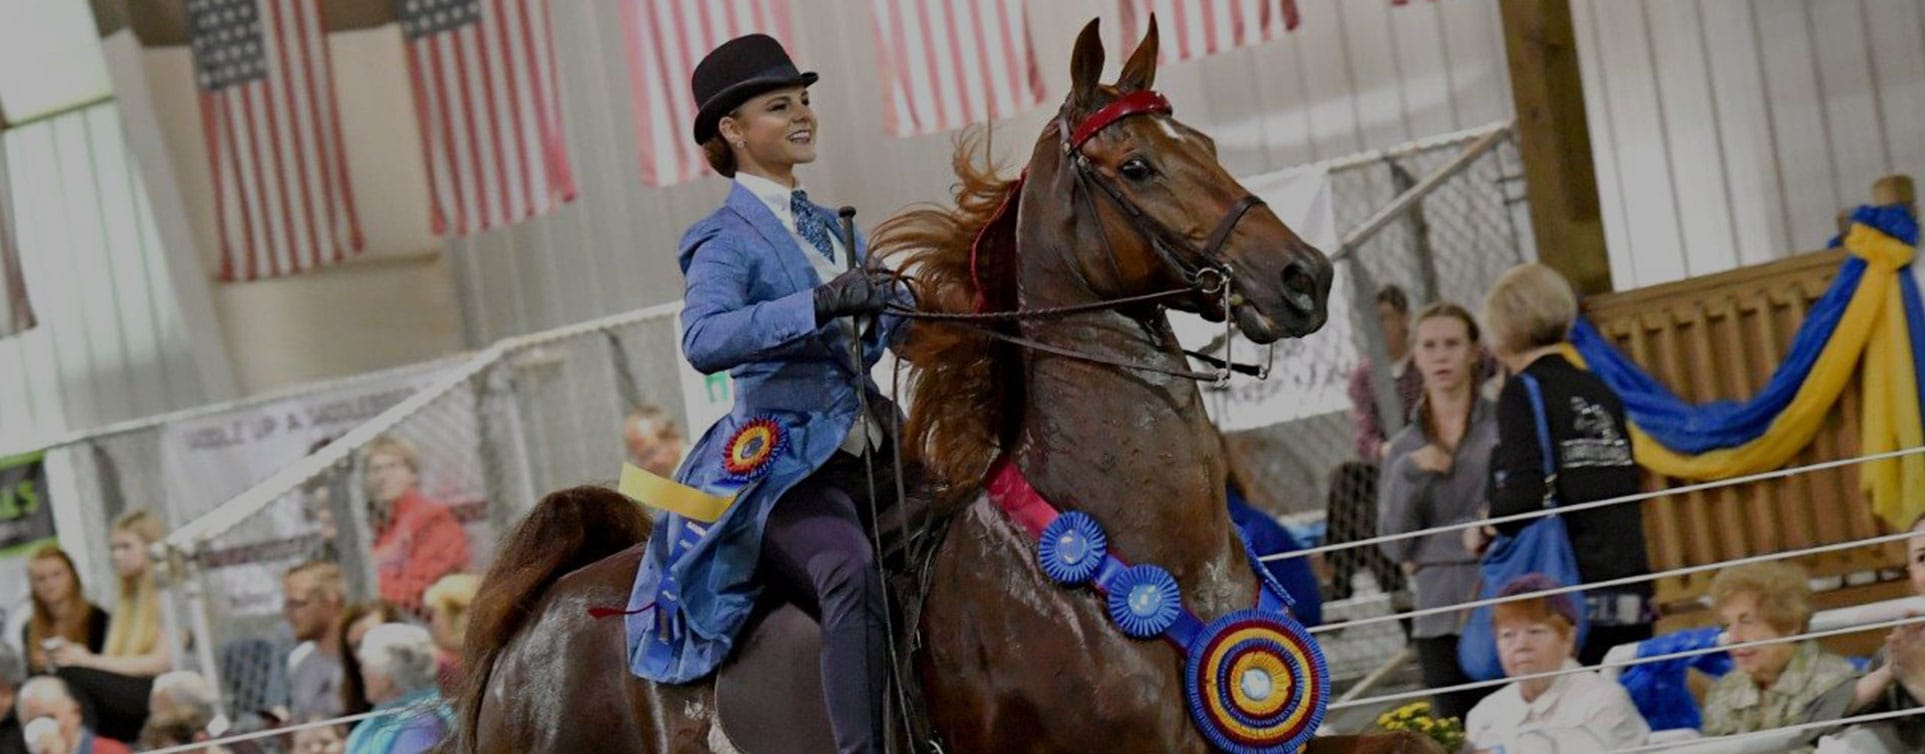 St Louis Charity Horse Show 